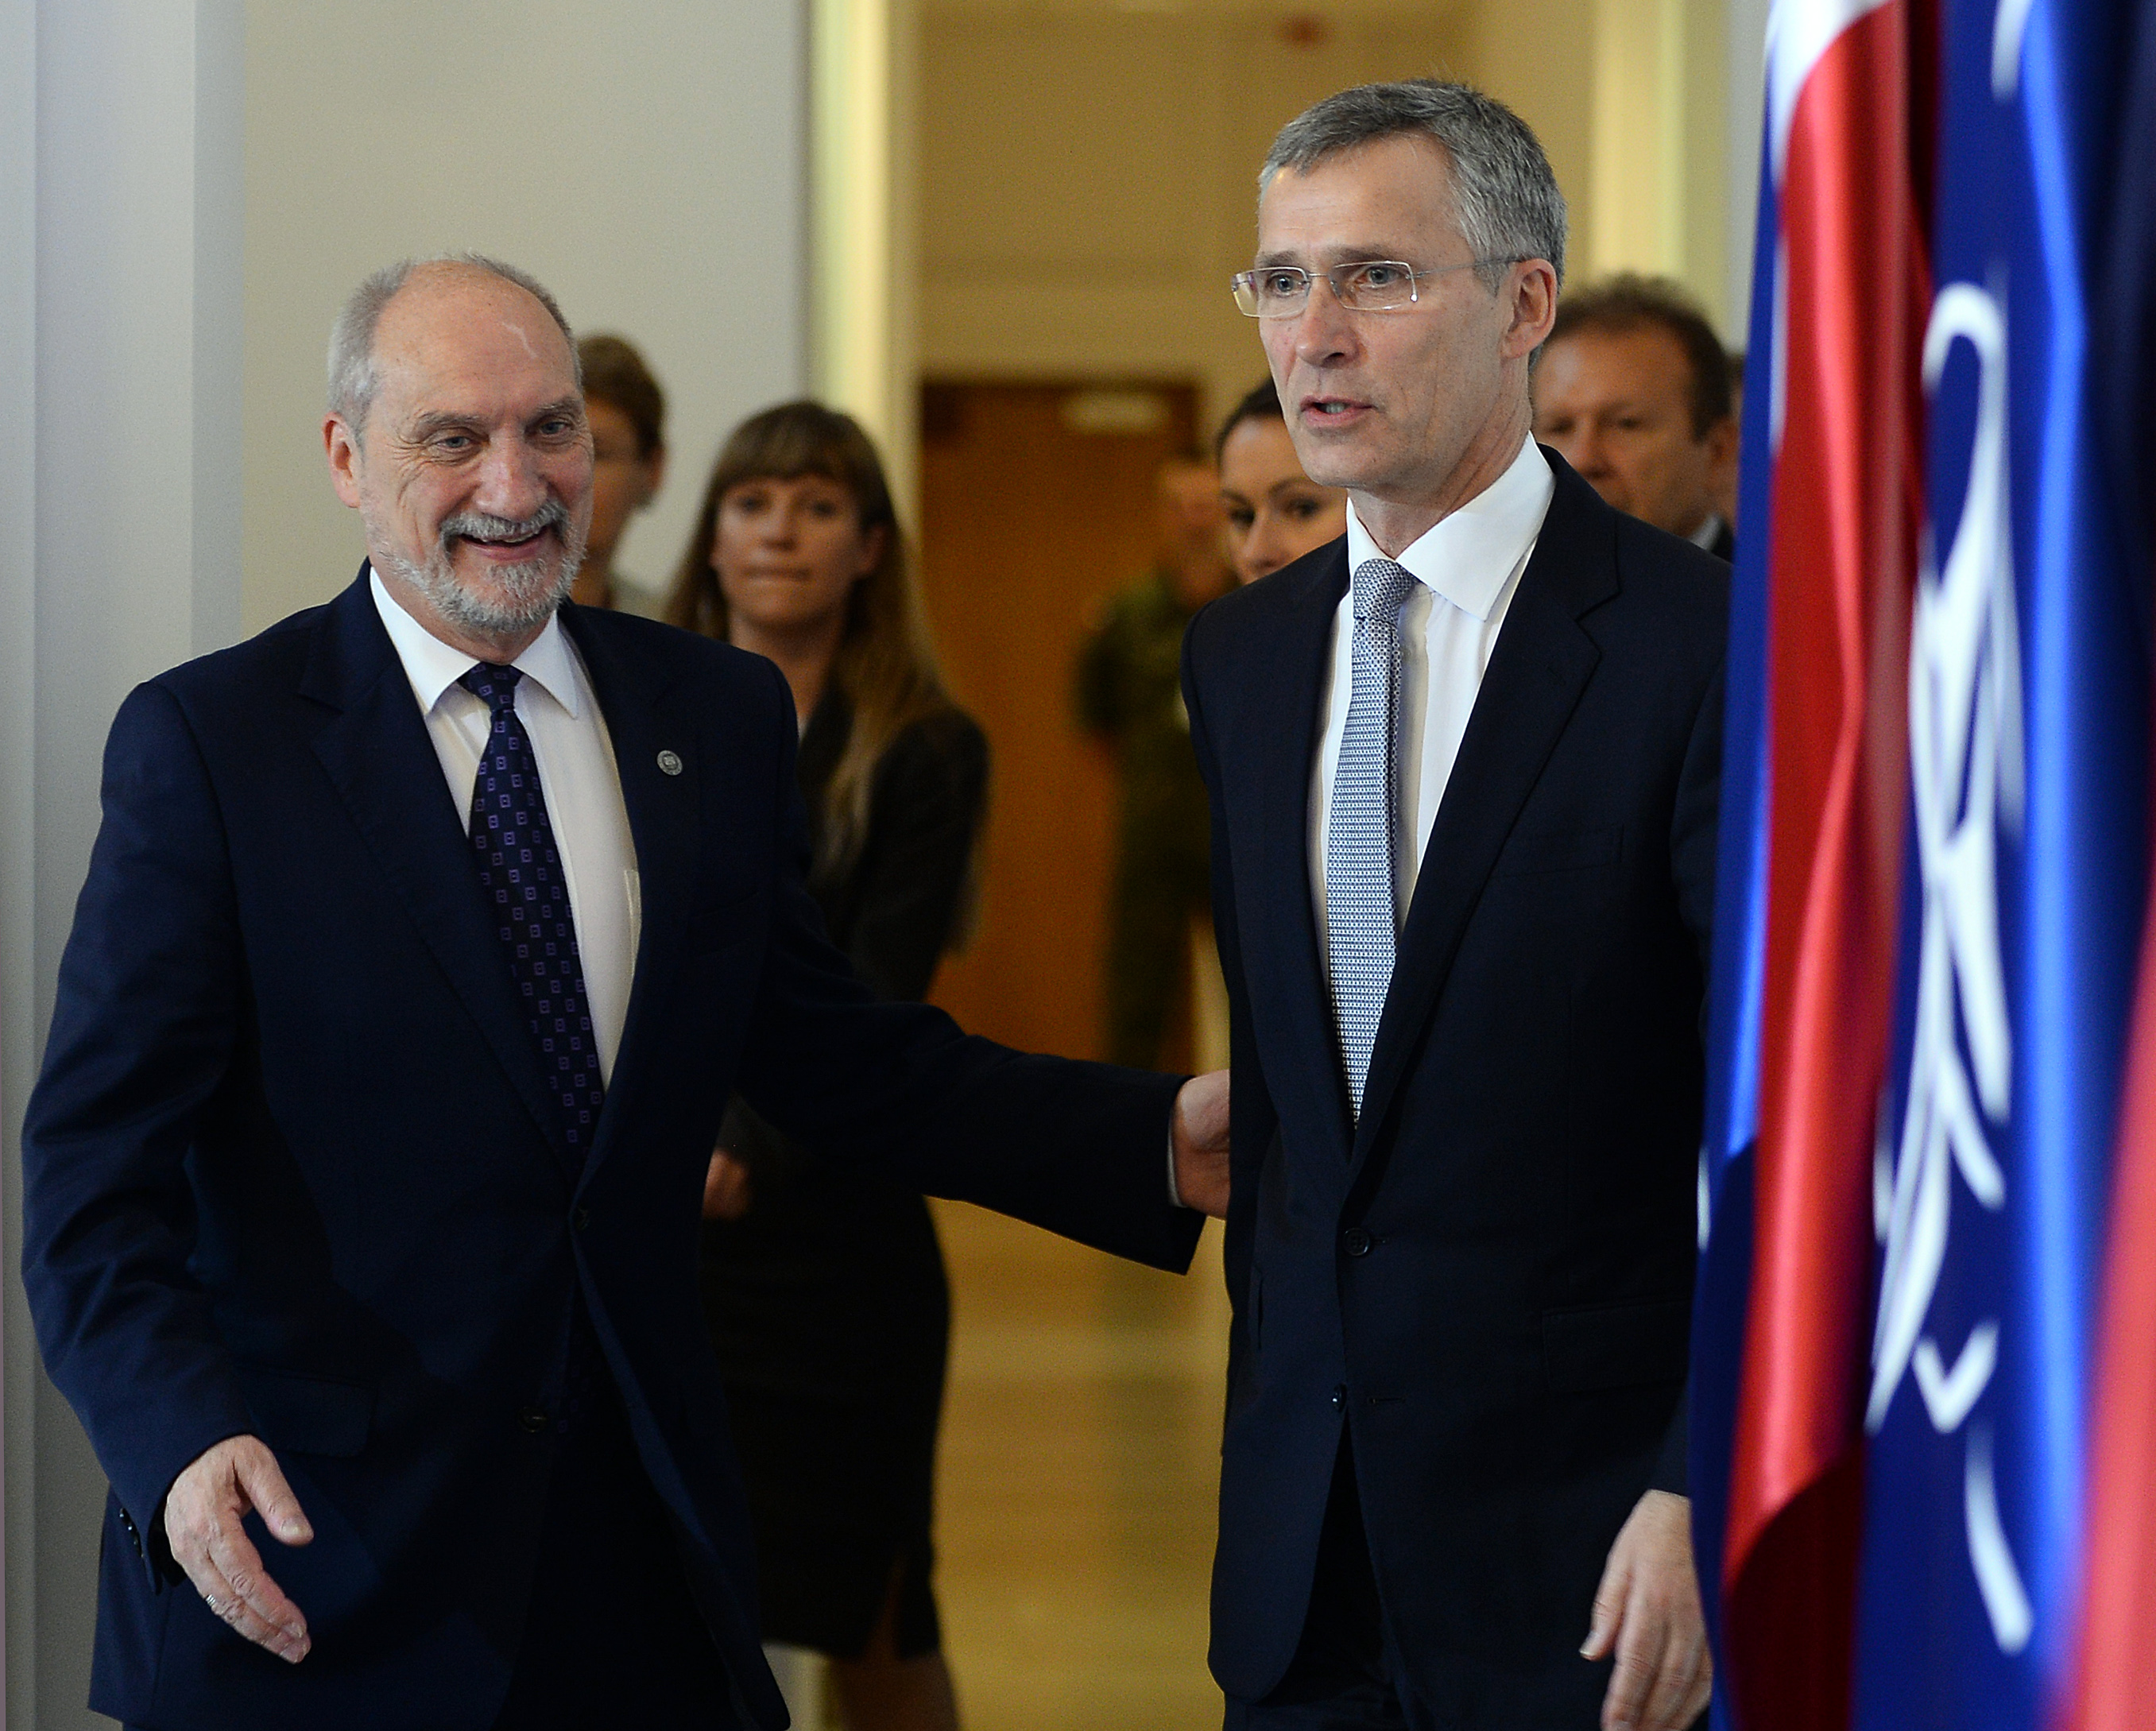 NATO Secretary General Jens Stoltenberg (R) and Polish Defence Minister Anoni Macierewicz arrive for a meeting ahead of a NATO summit, on May 31, 2016 in Warsaw. / AFP / JANEK SKARZYNSKI 